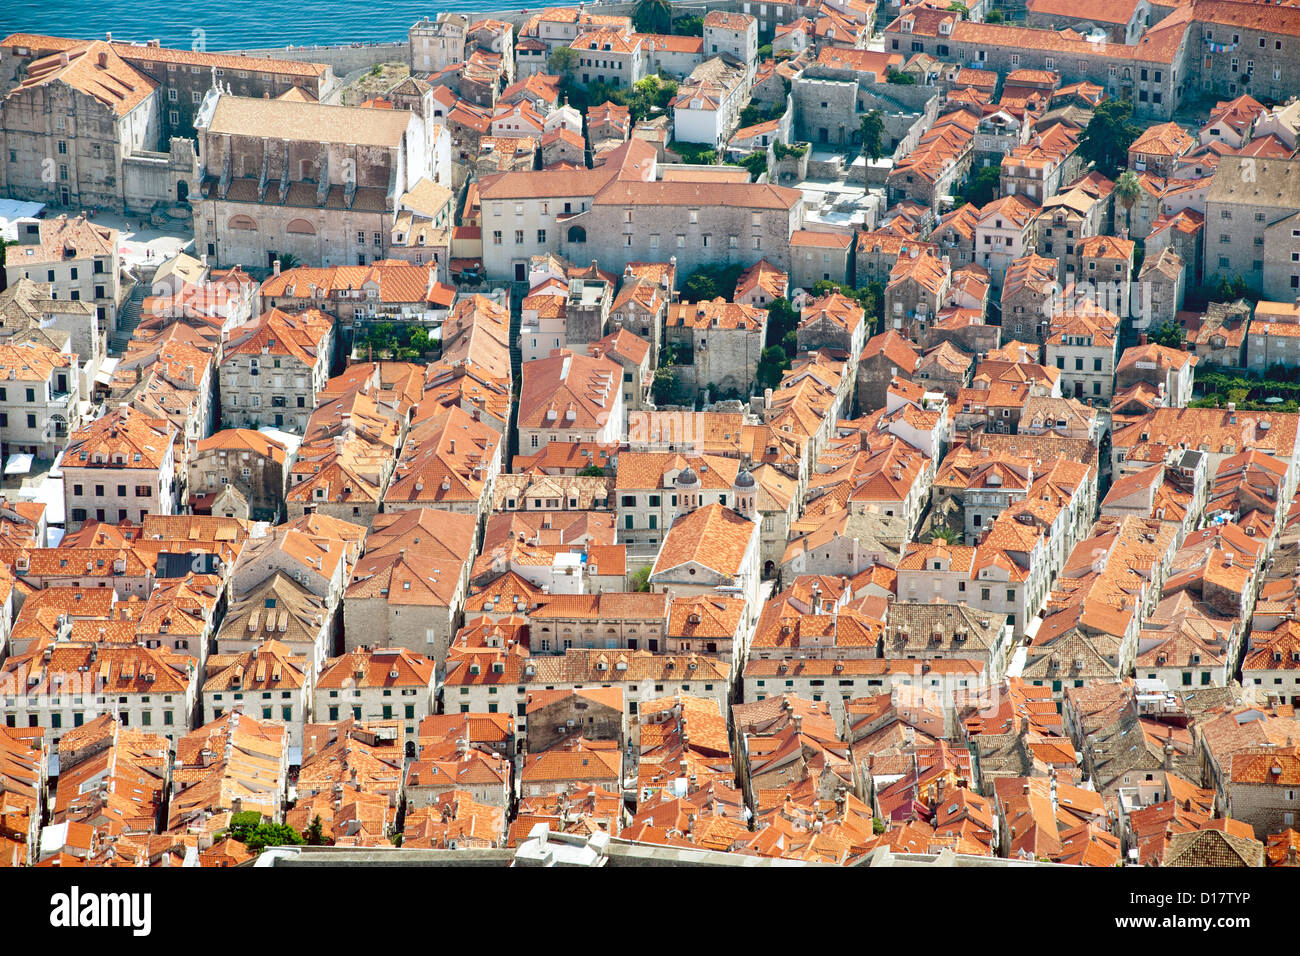 View of rooftops in the old town in the city of Dubrovnik on the Adriatic coast of Croatia. Stock Photo